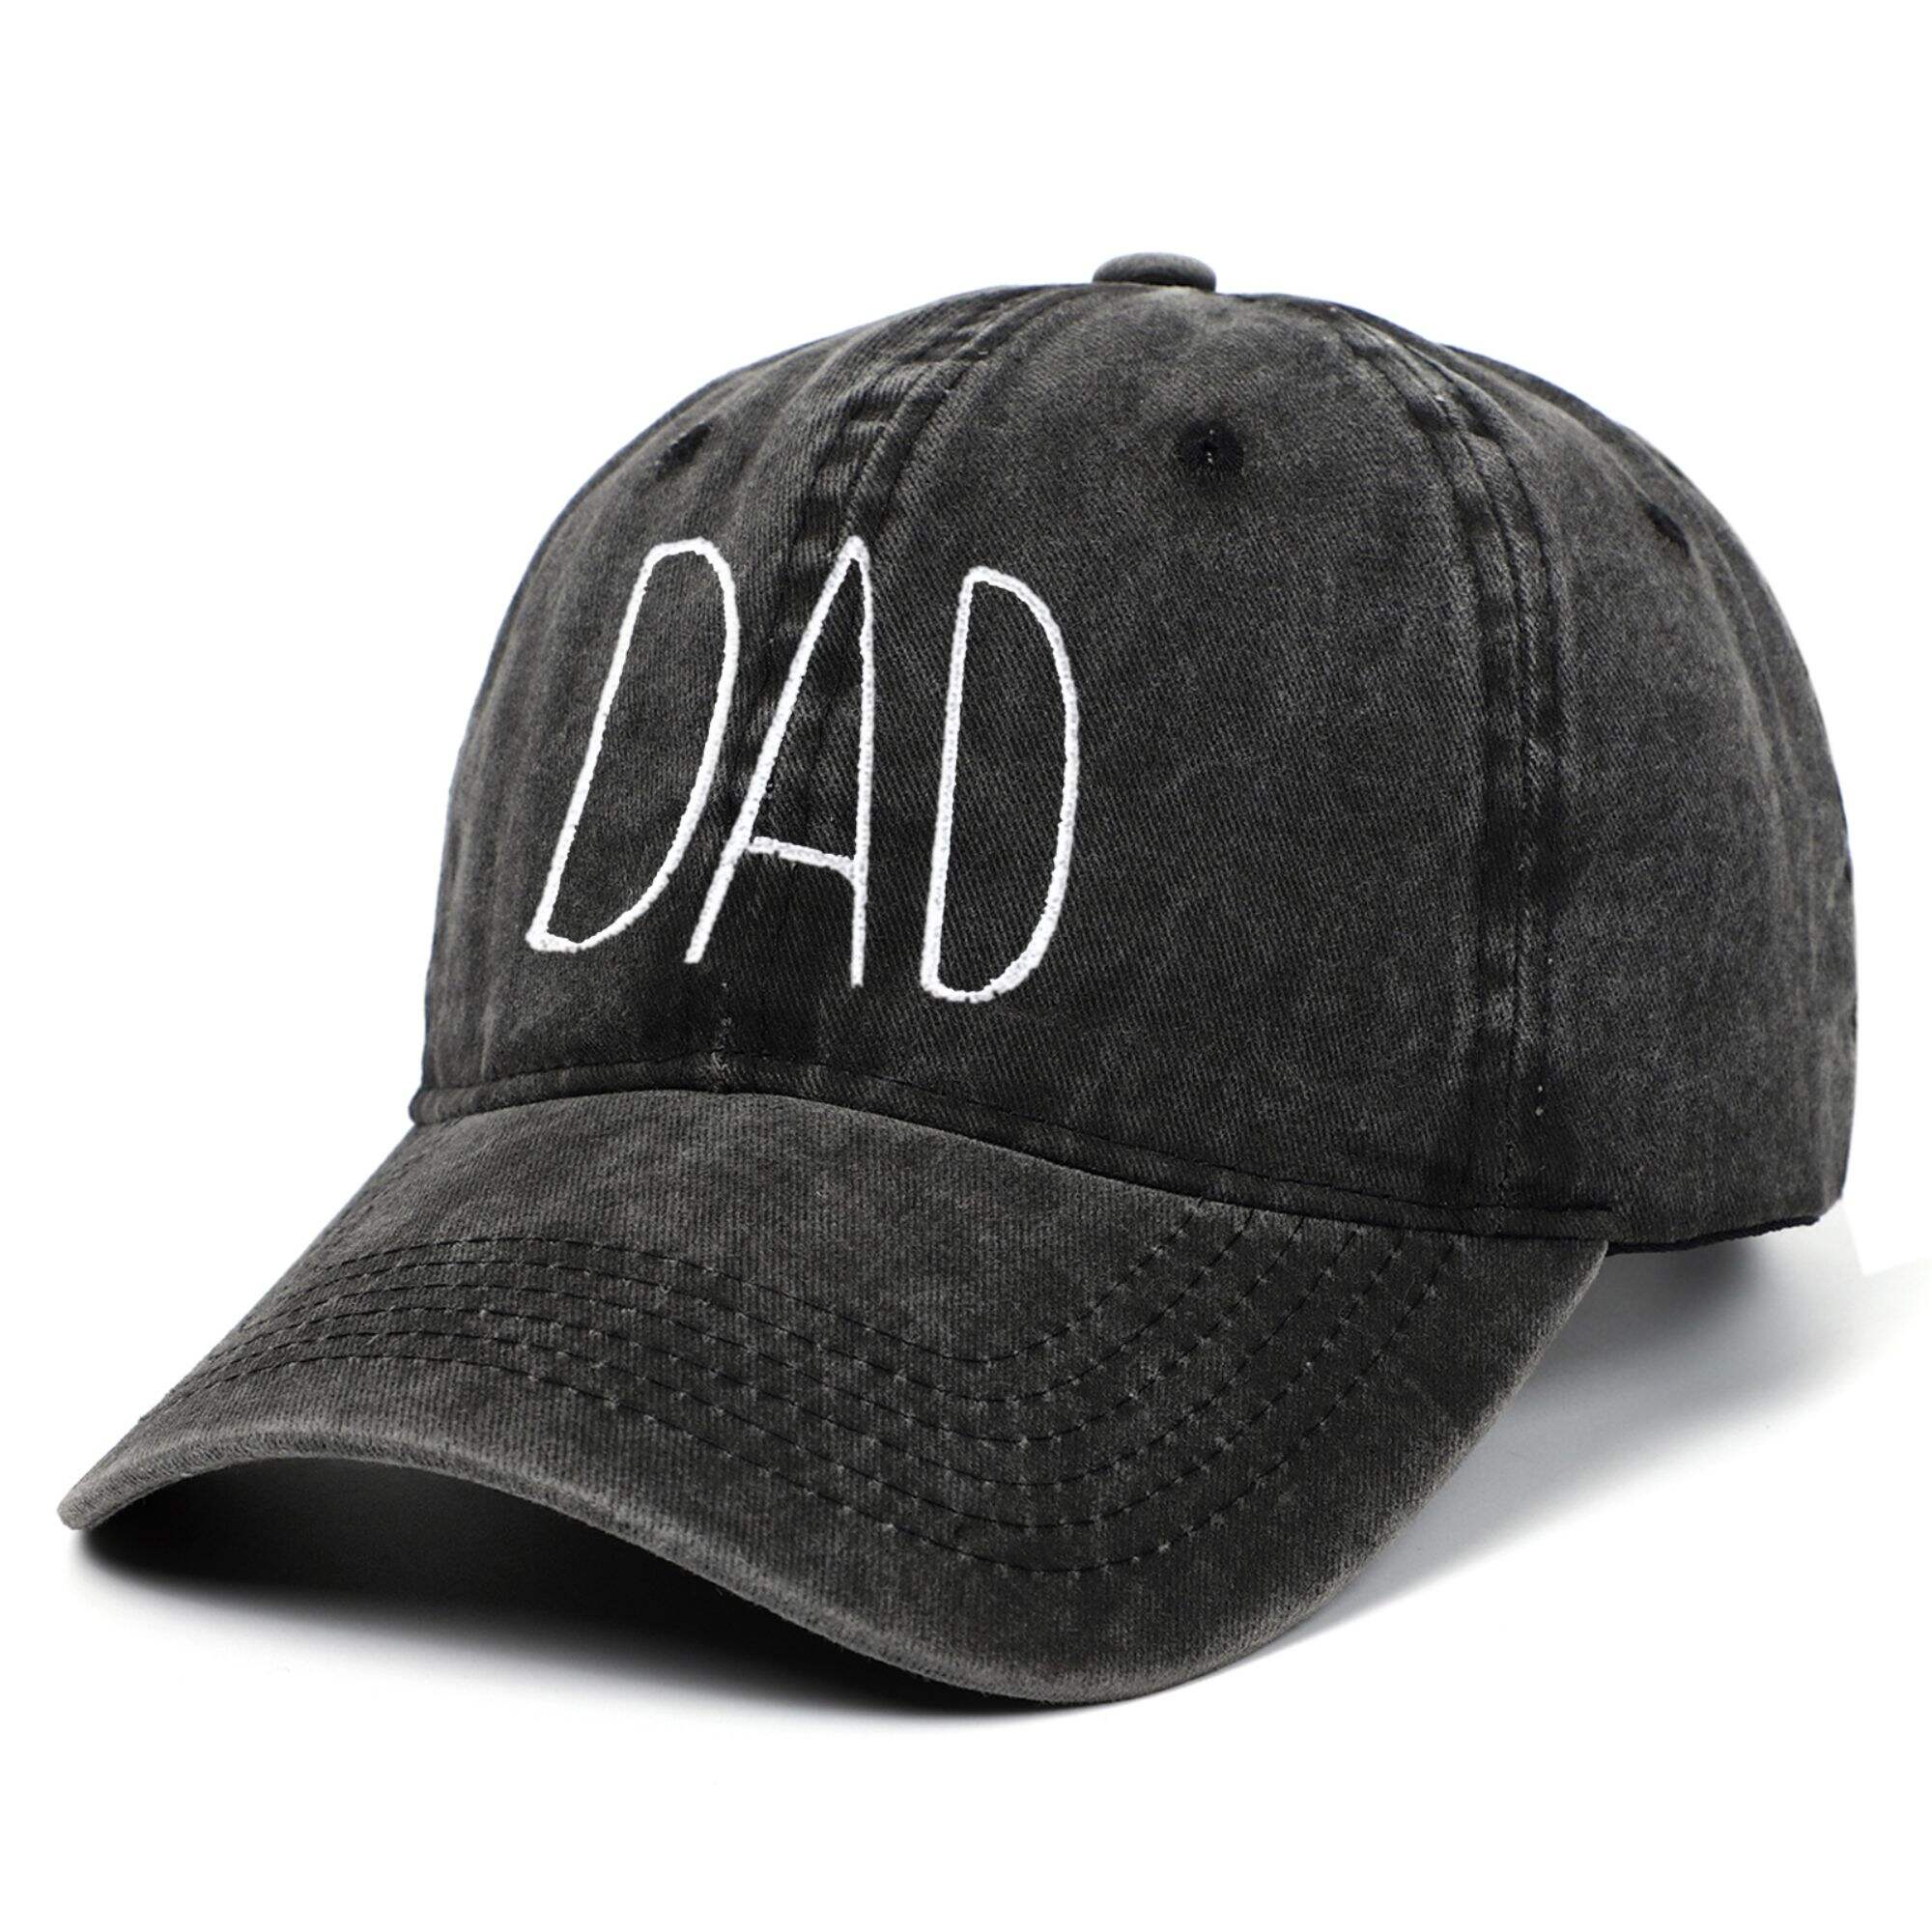 Embroidery dad hat